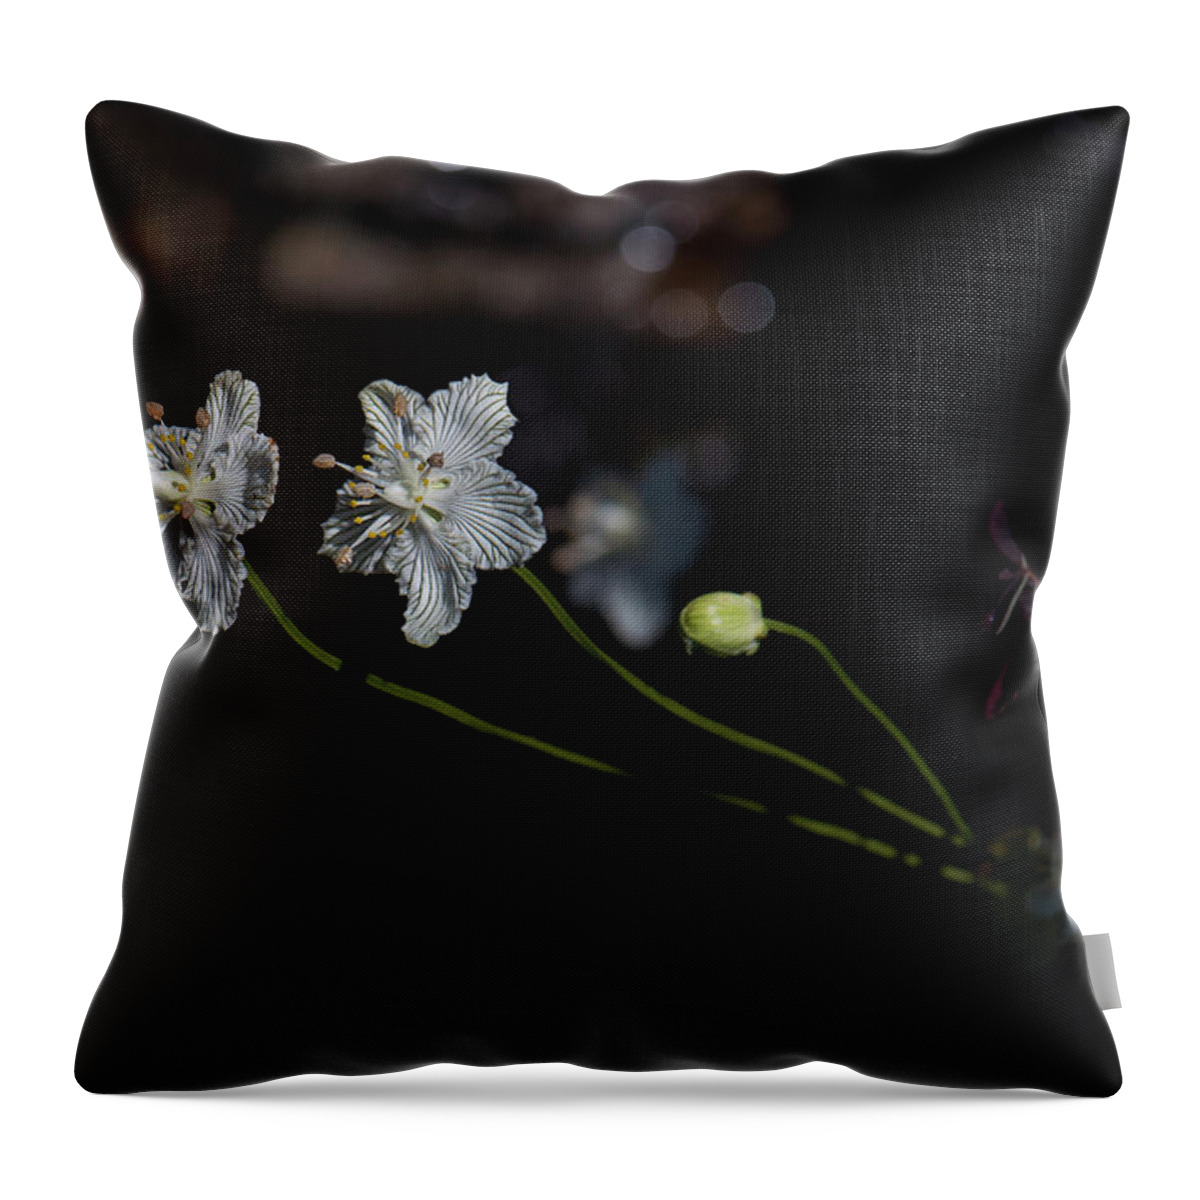 Flowers Throw Pillow featuring the photograph Pretty Pair by Greg Efner